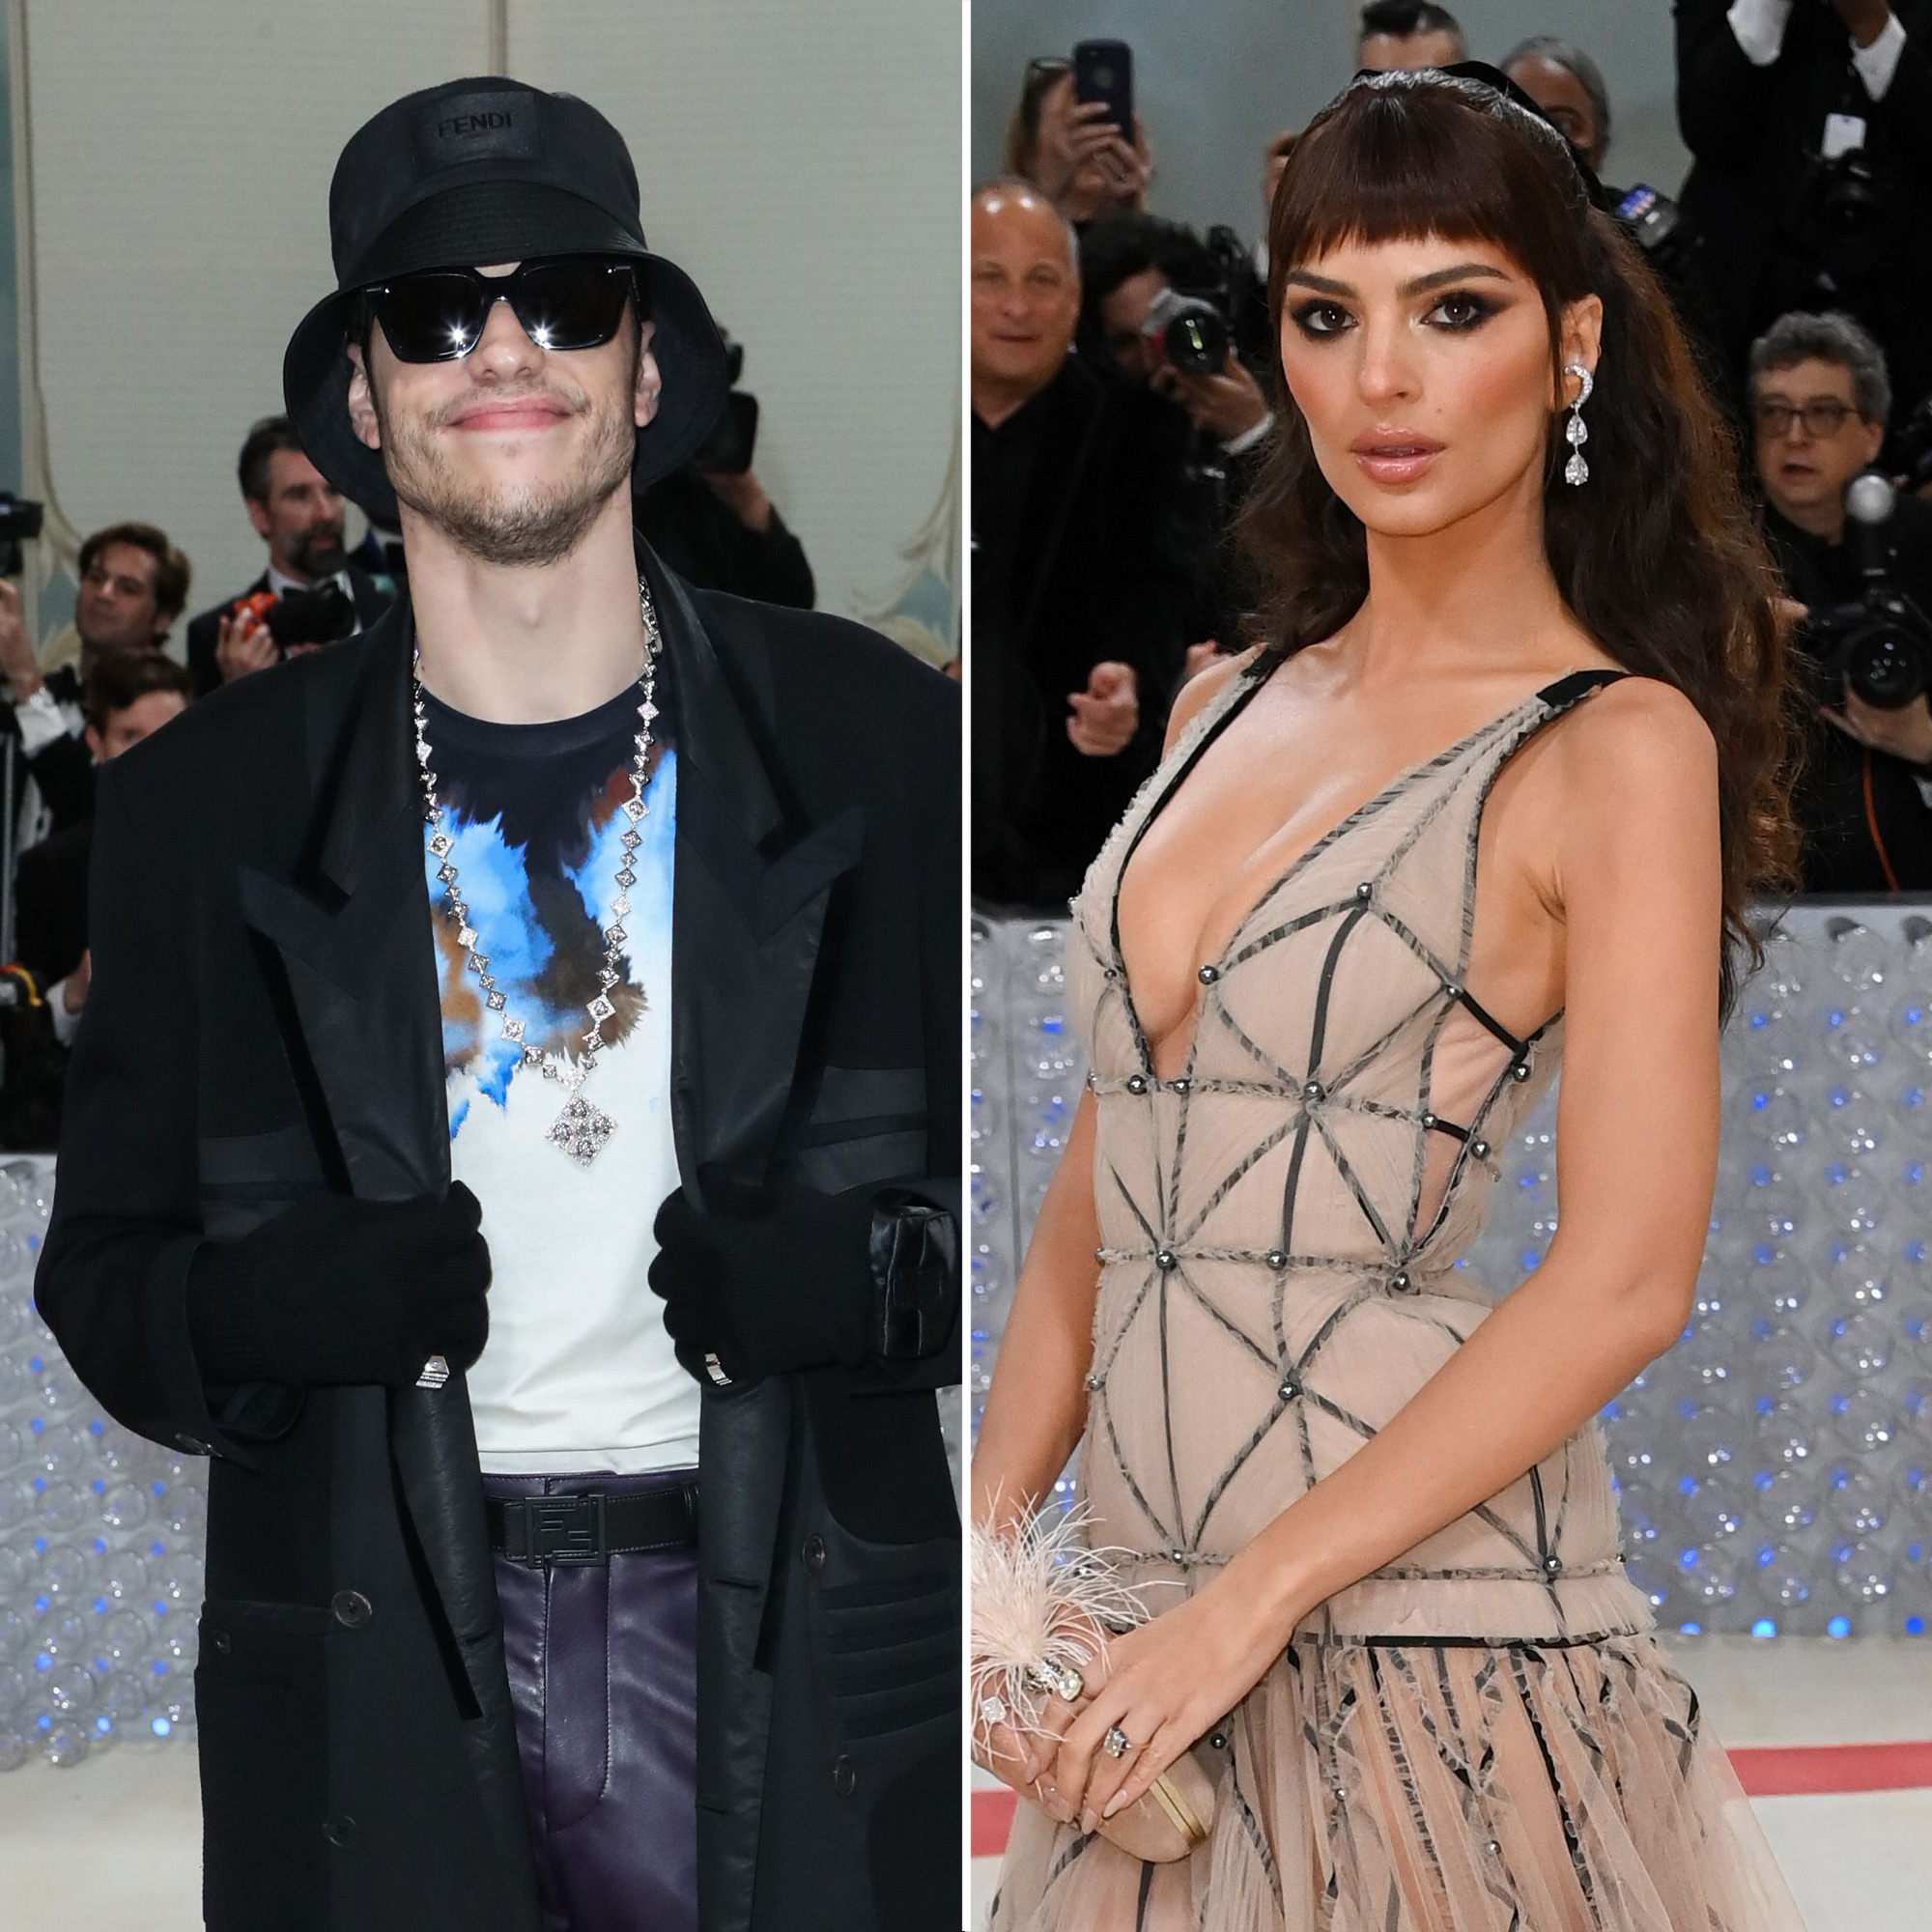 Celebrity Exes Who May Have Seen Each Other at the 2022 Met Gala